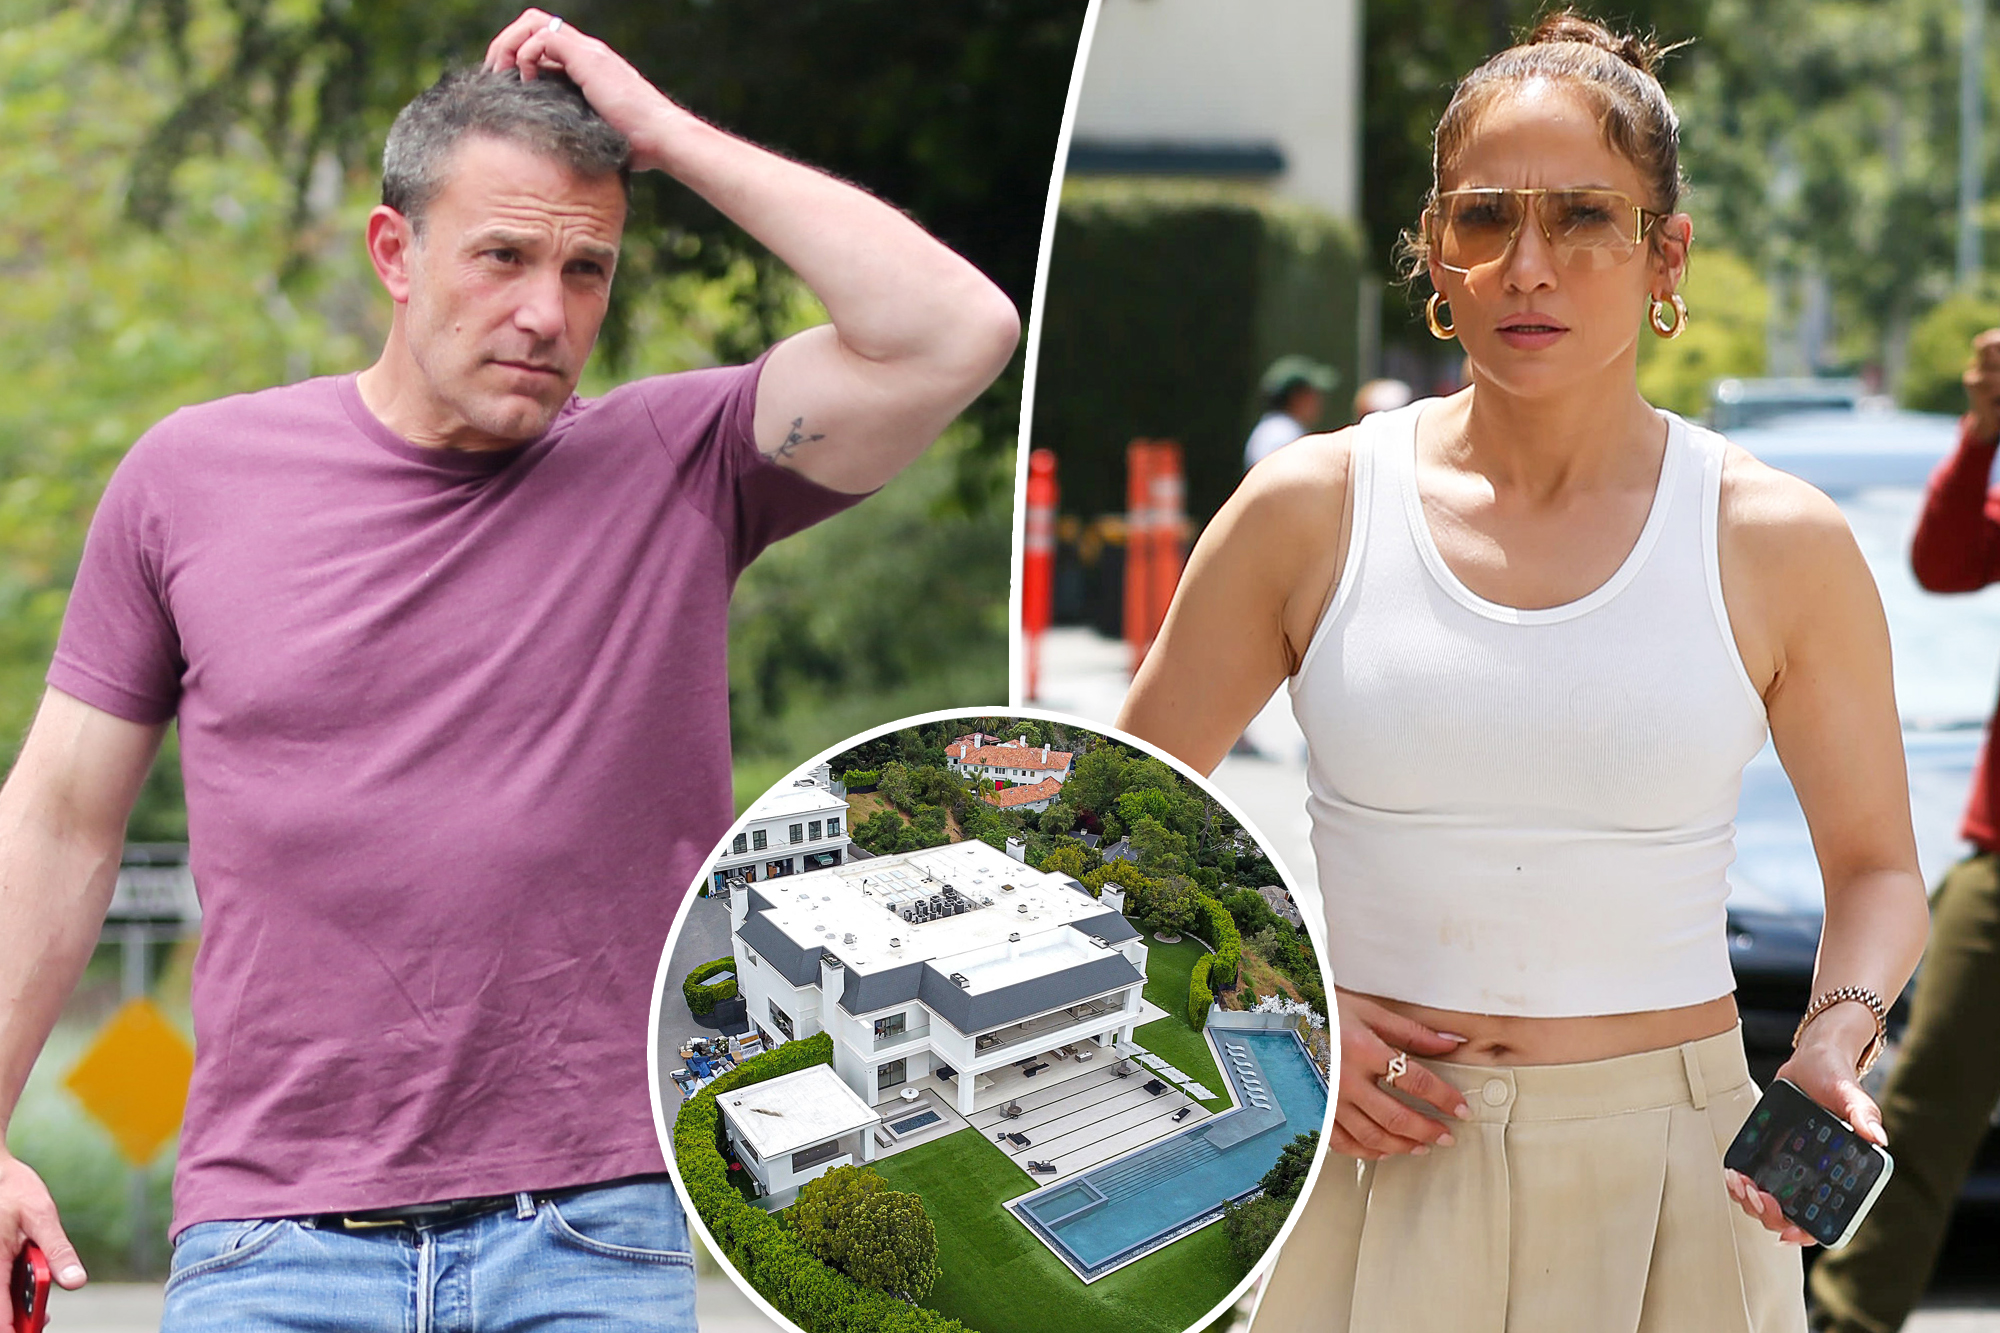 J.Lo and Ben Affleck's Art Sale Sparks Rumors Amid Marital Woes